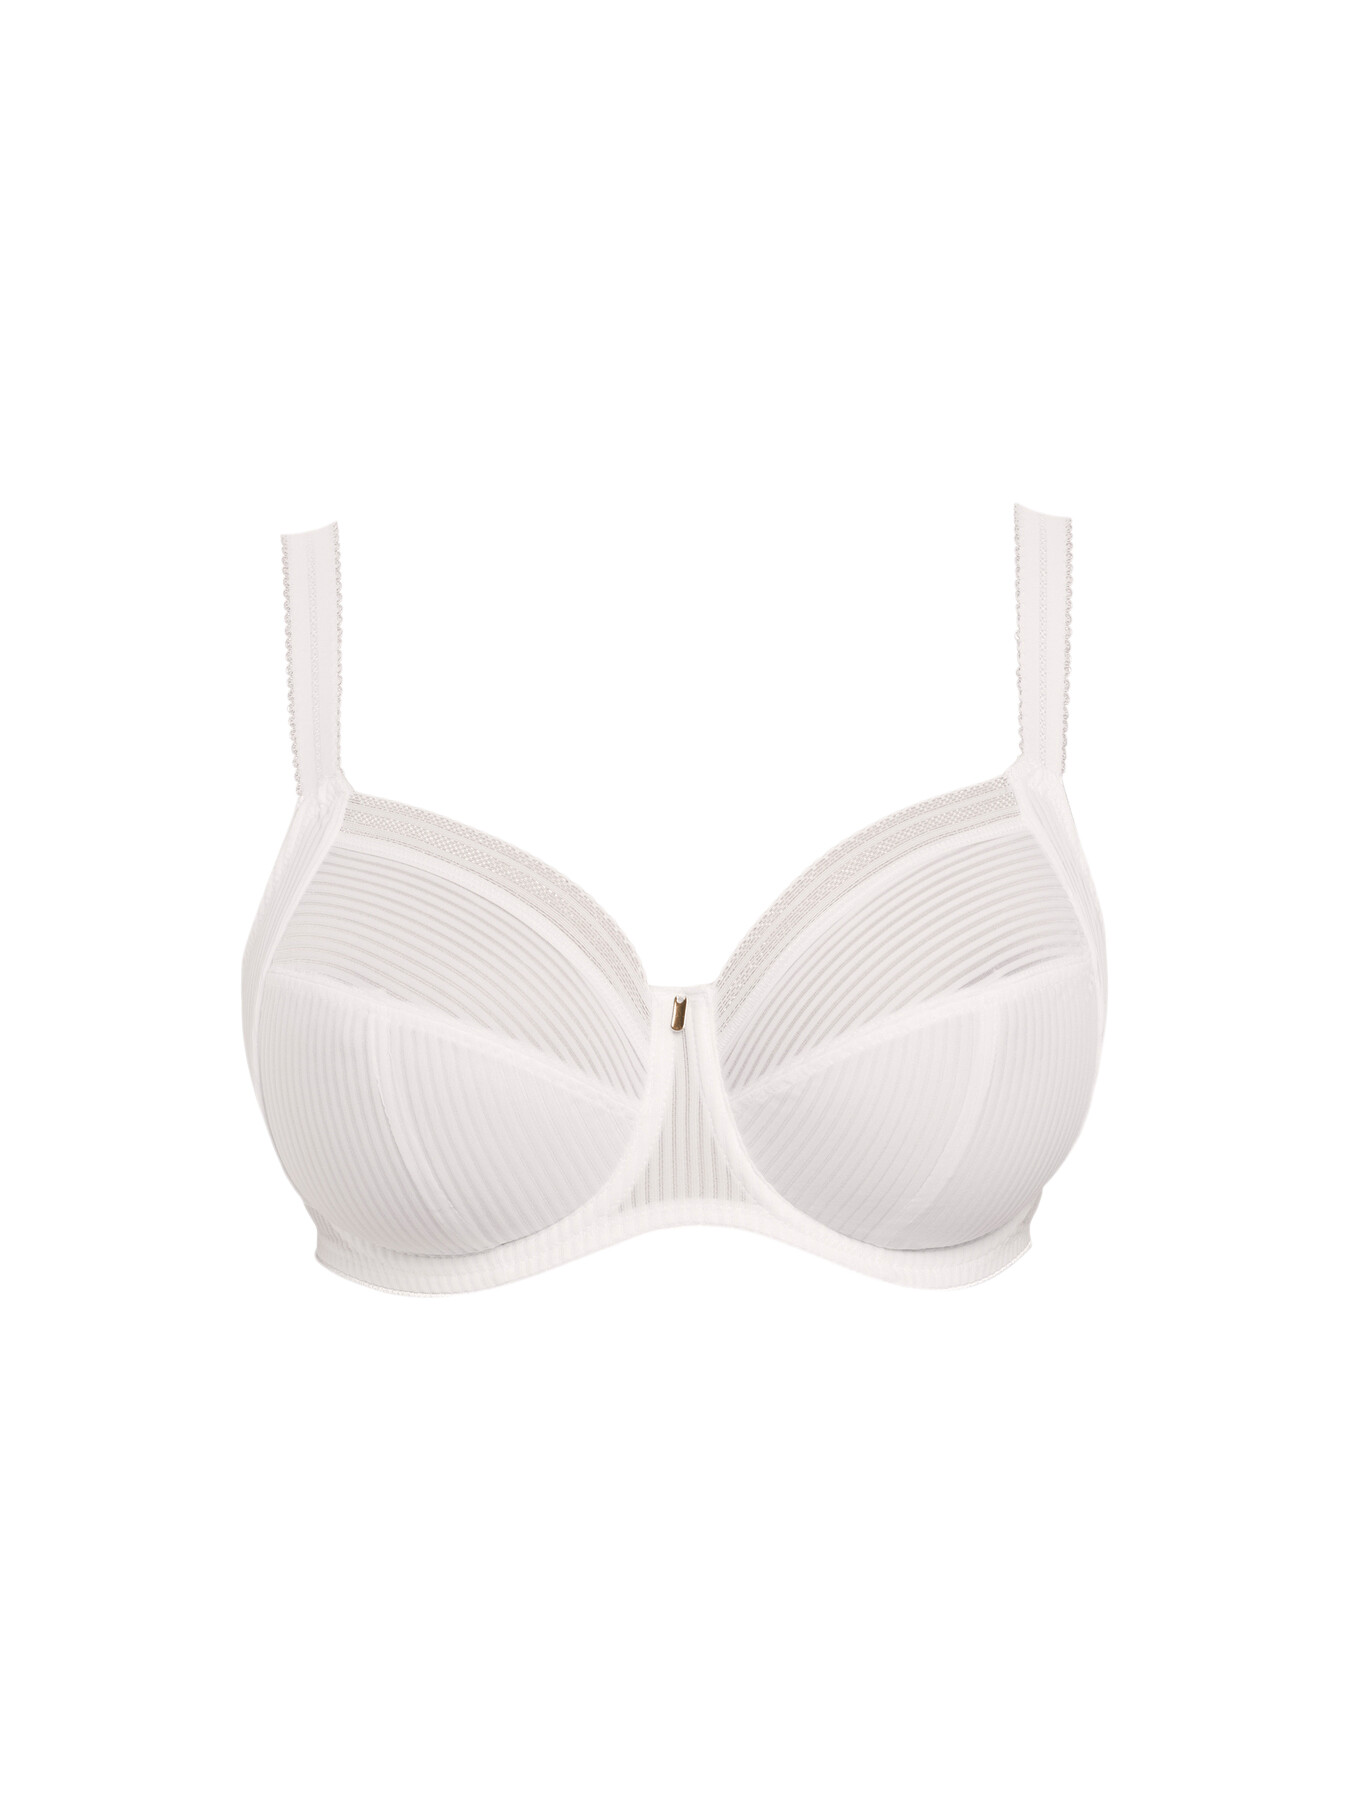 Women's Fantasie Fusion Underwire Full Cup Bra With Side Support | Fenwick